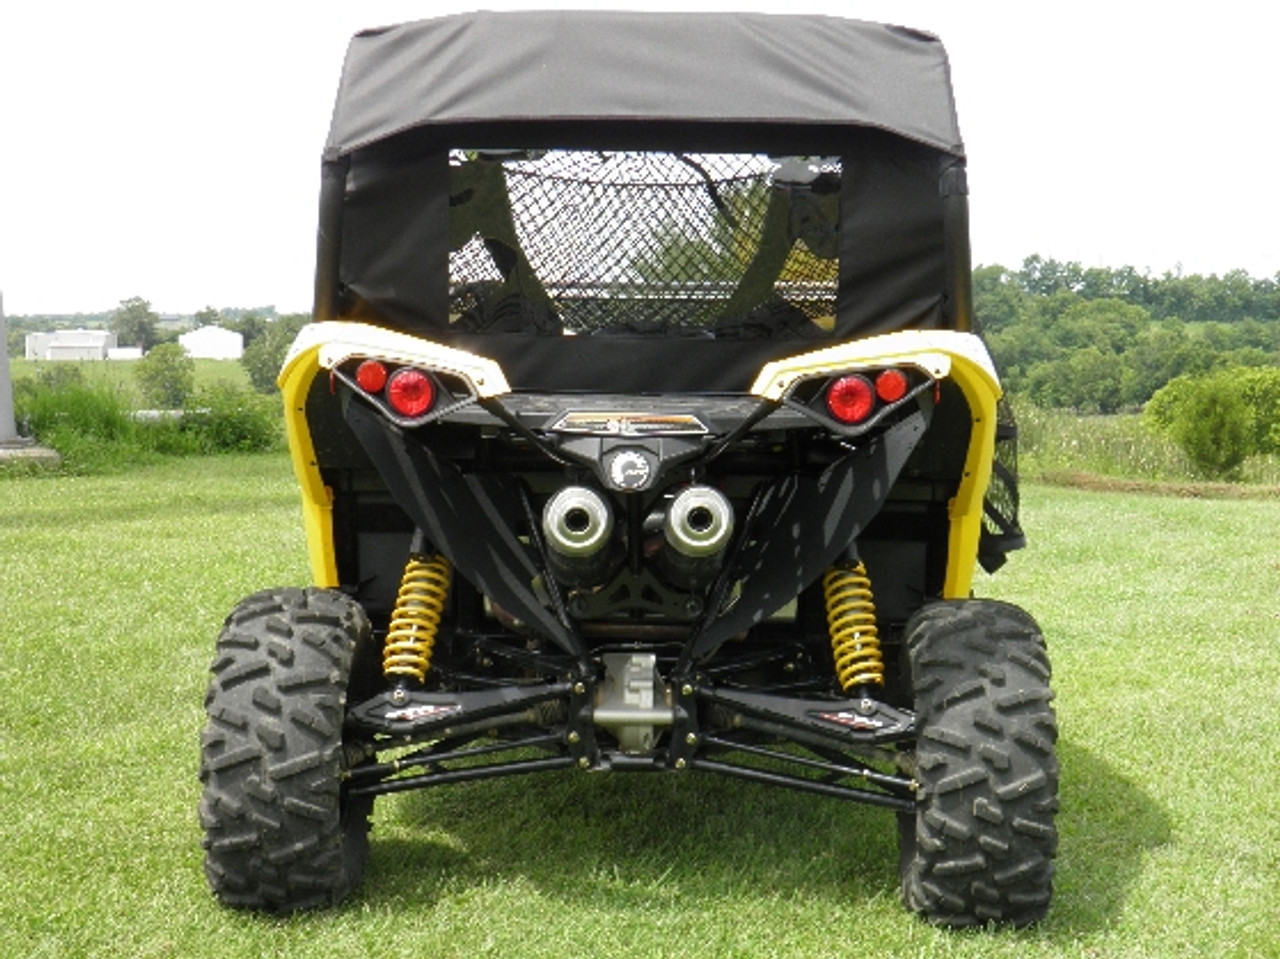 3 Star side x side can-am maverick doors and rear window rear view